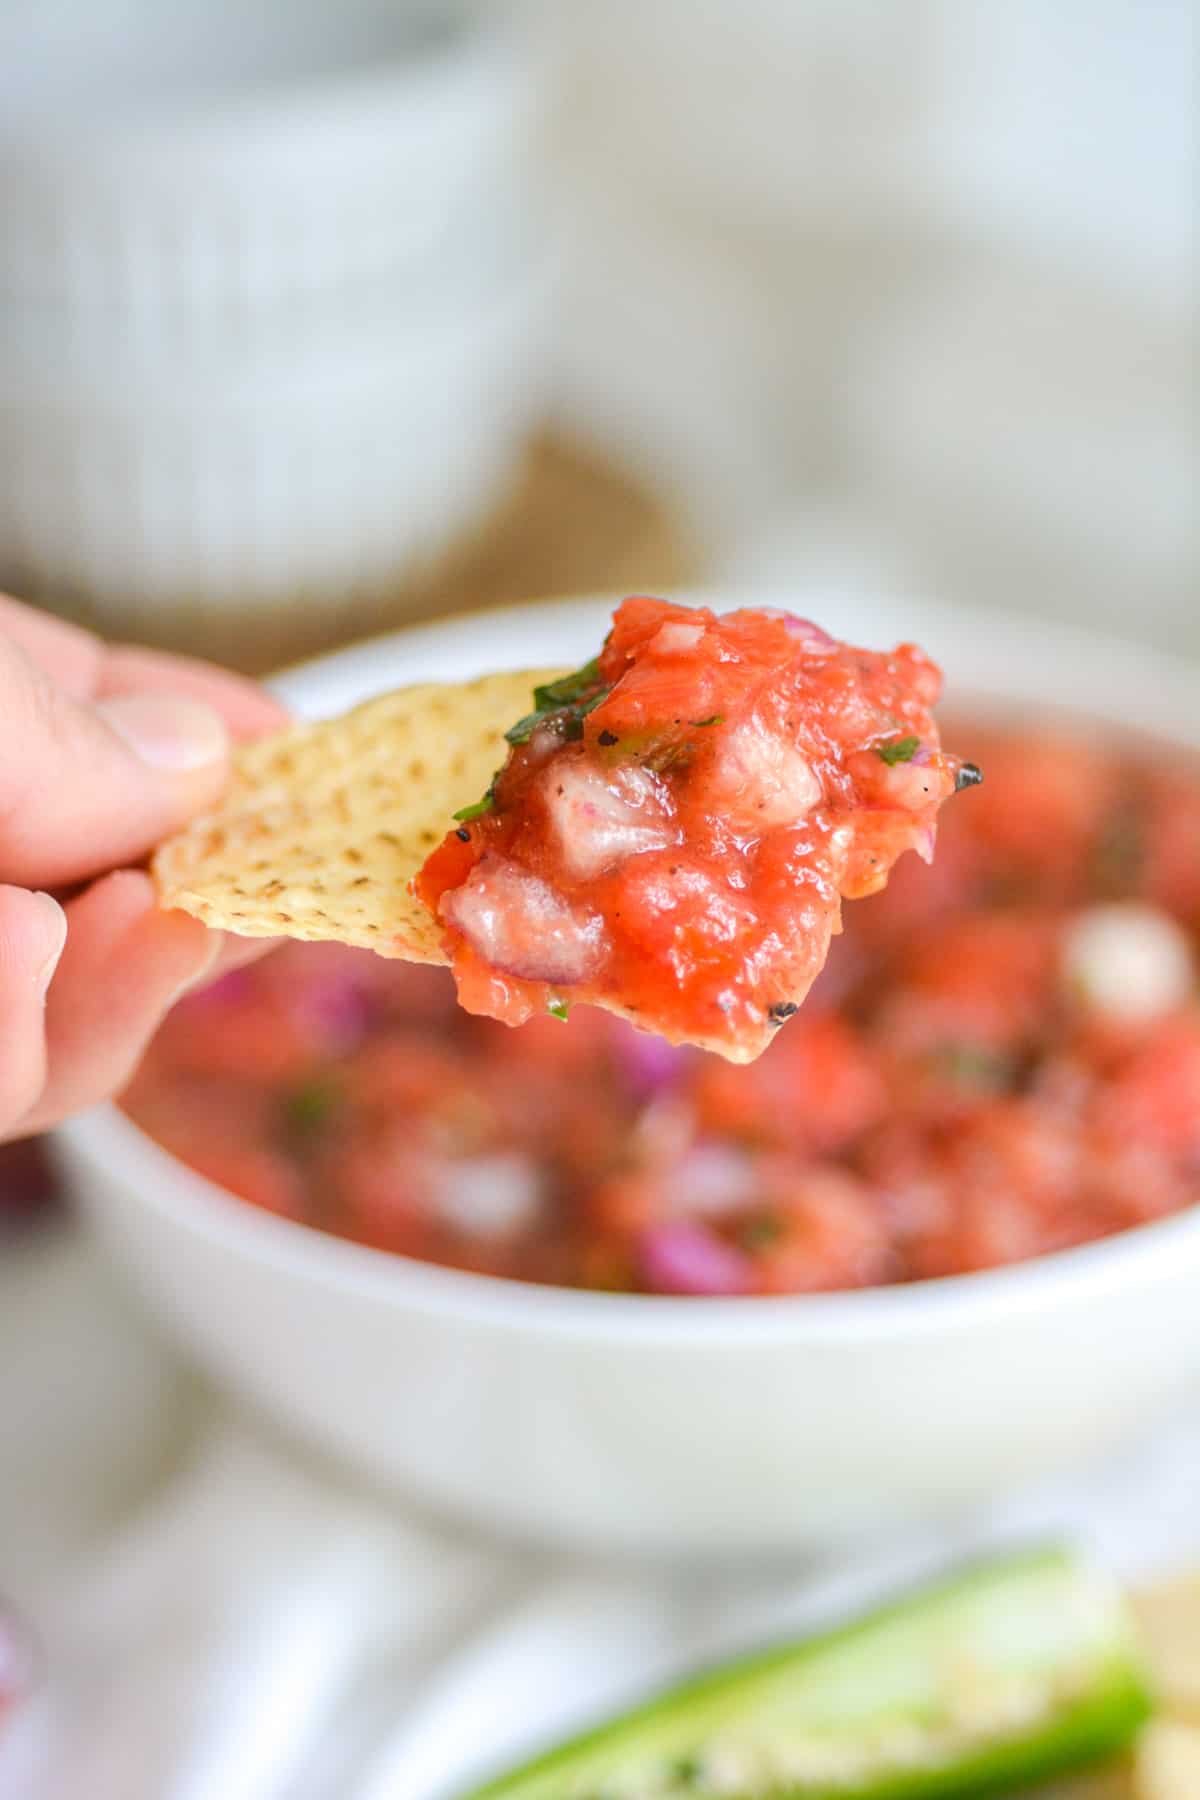 Hand holding a chip with salsa on it.